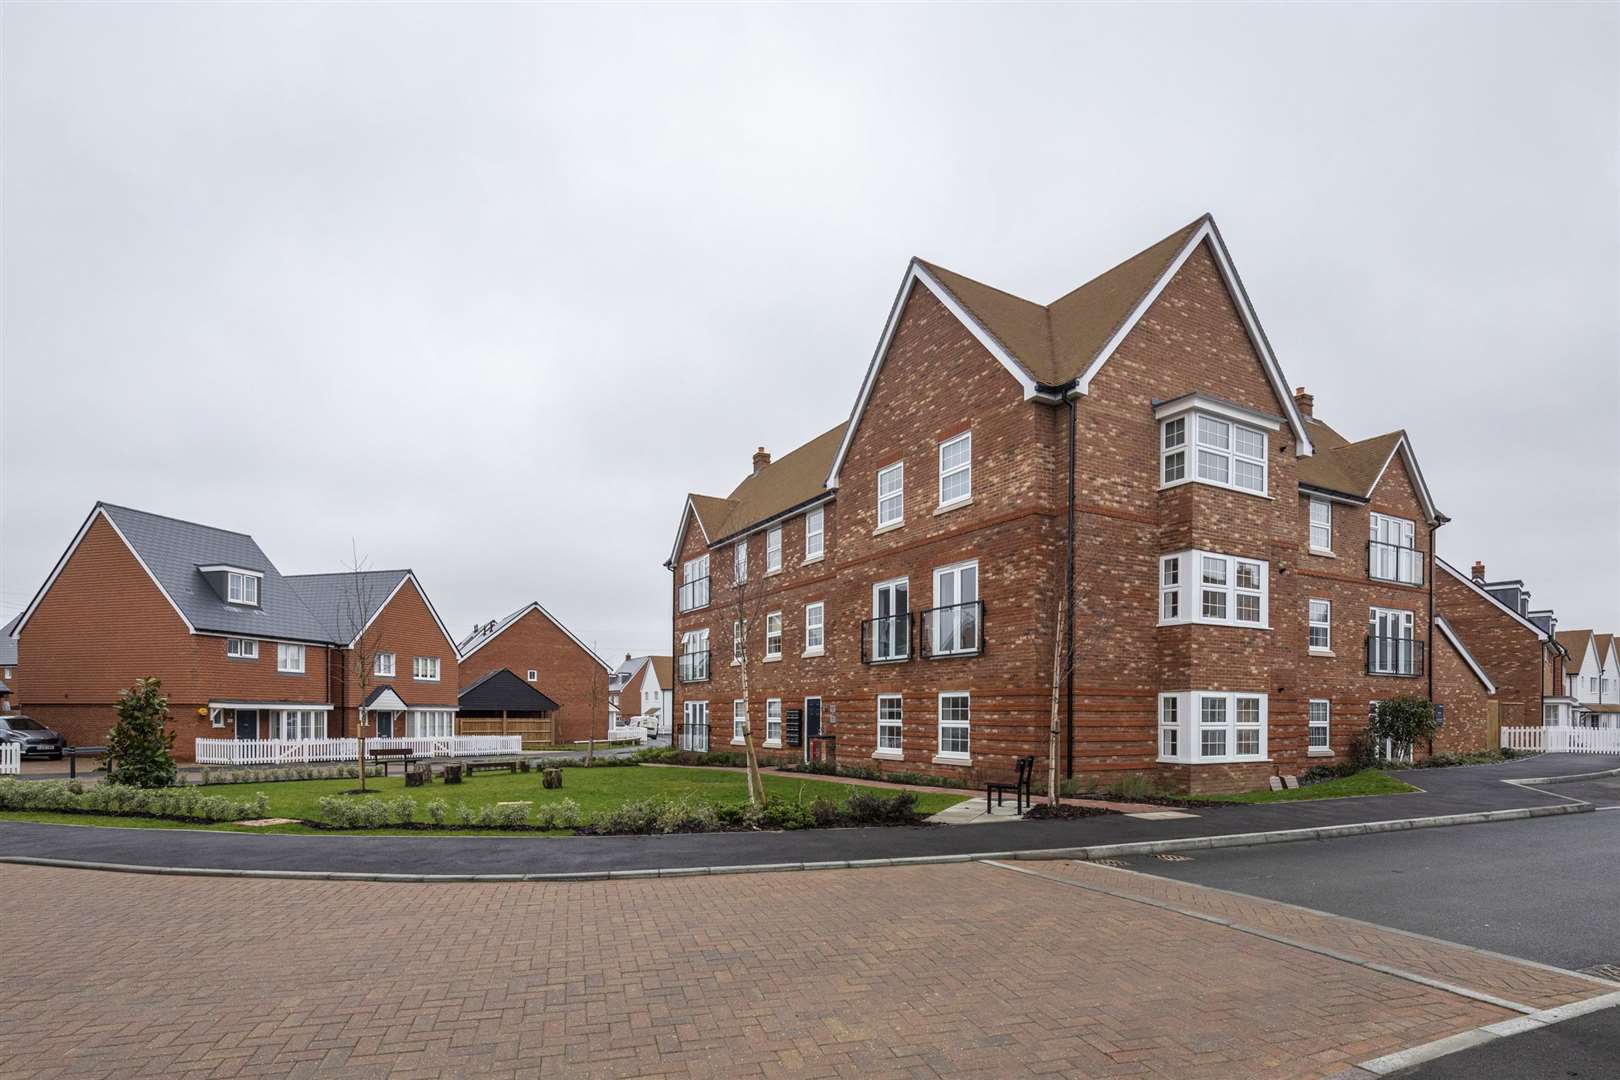 Bellway's Buckland Rise developmnet at Peters Village in Wouldham has now been completed and all homes sold